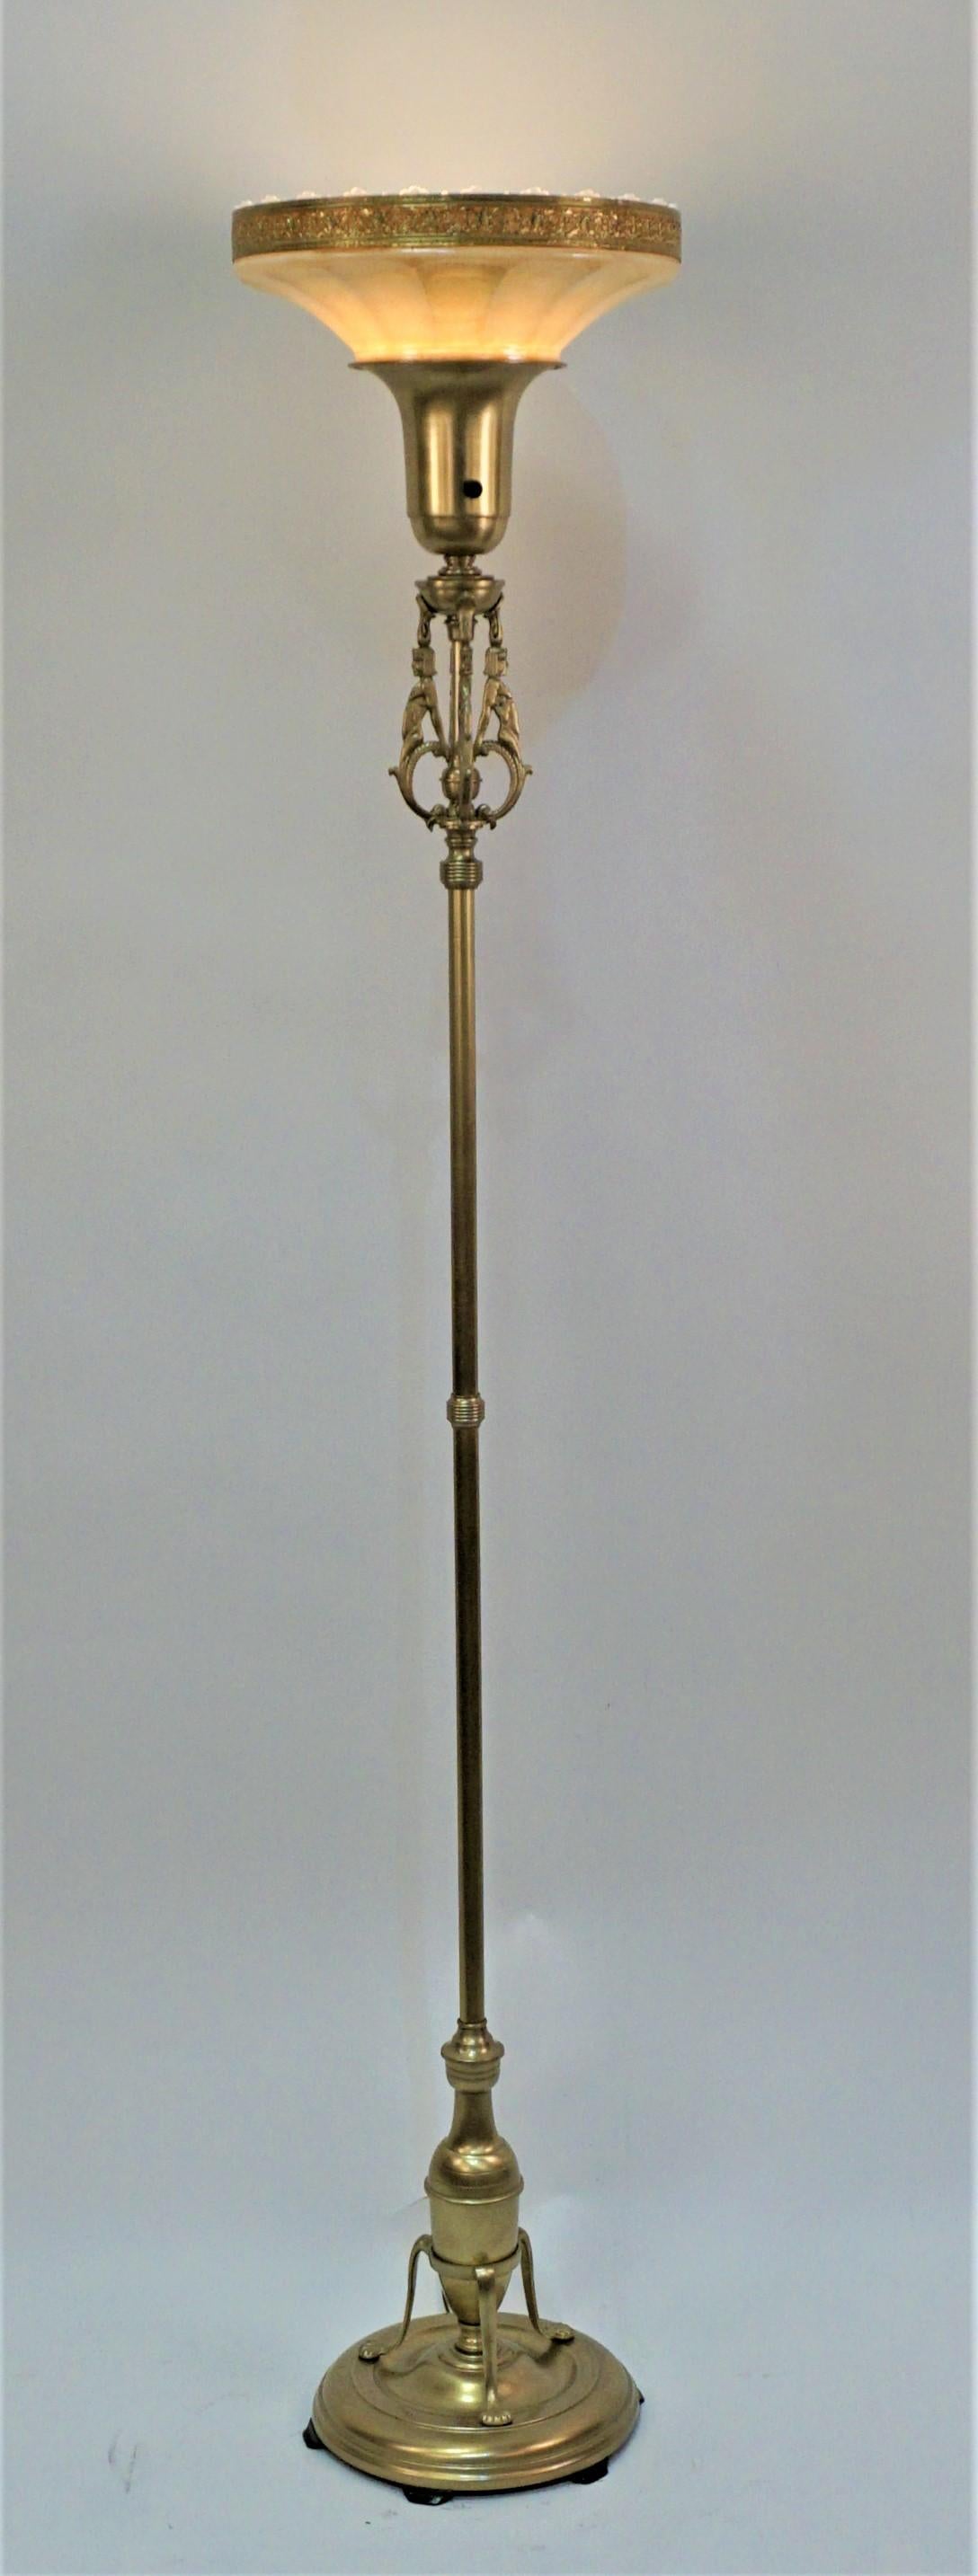 American brass 1920s torchiere floor lamp with glass shade.
3way socket up 300 watts.